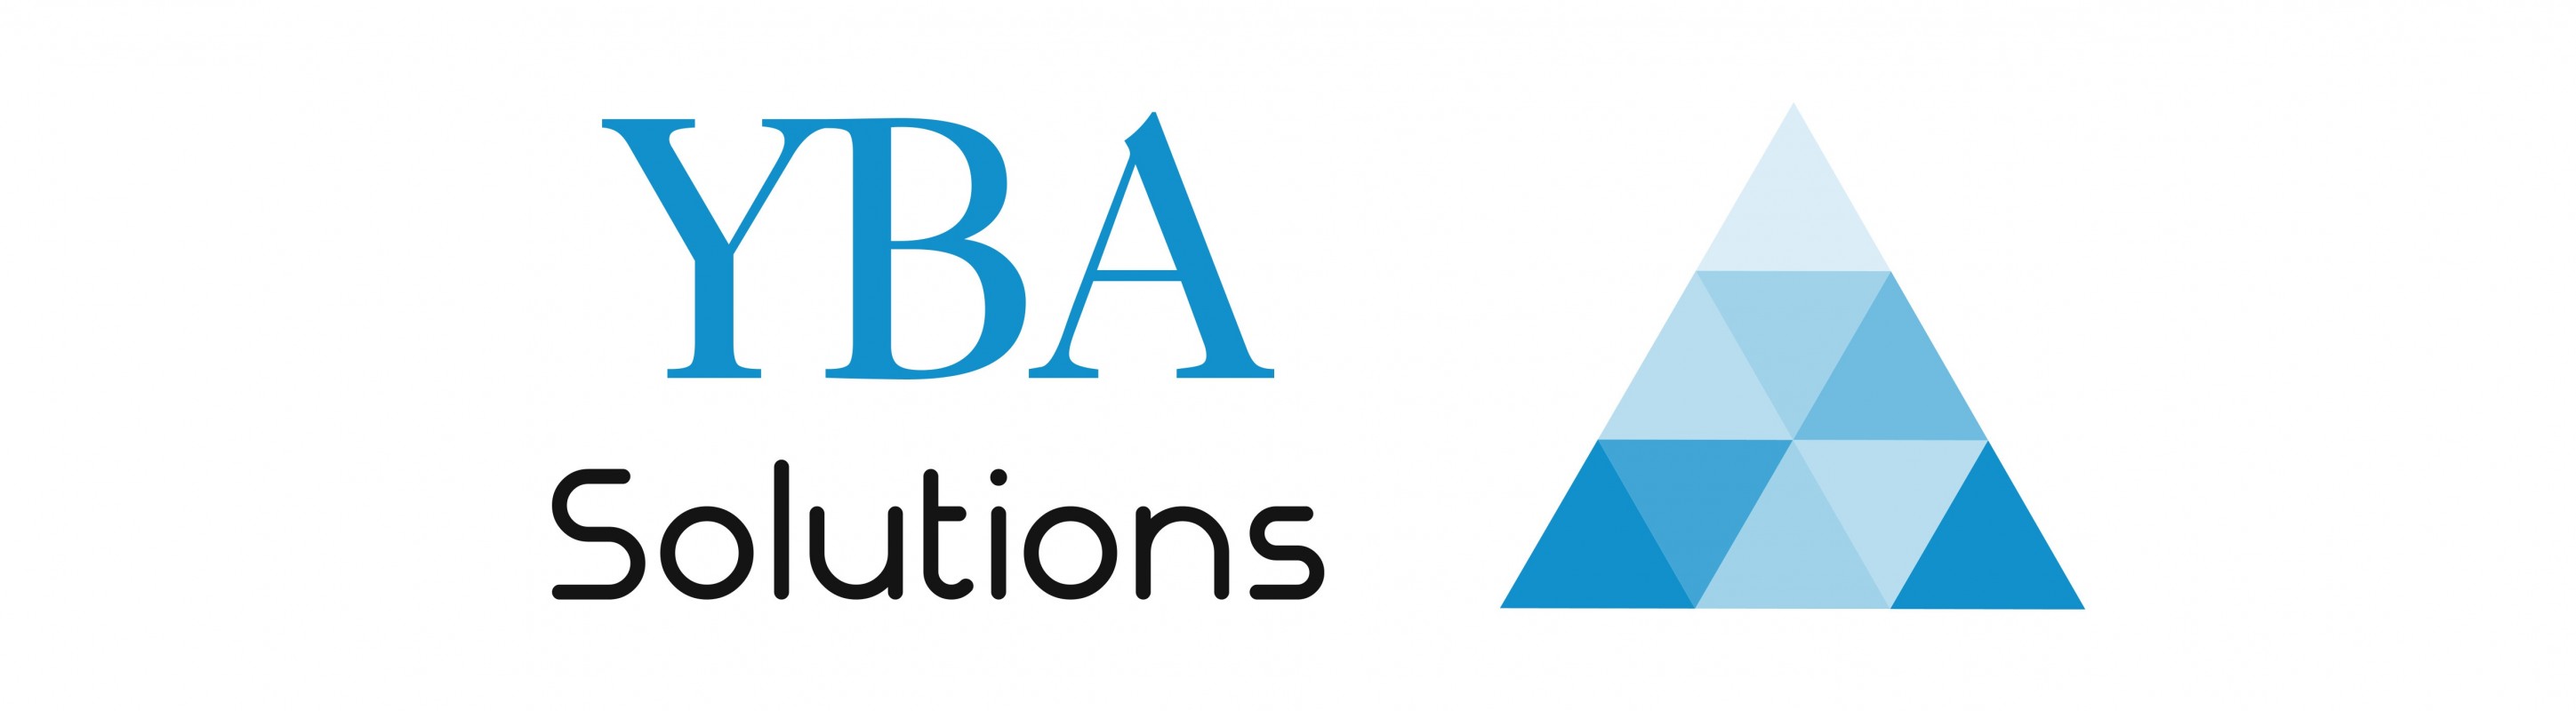 YBA Solutions - Australian Accounting Services